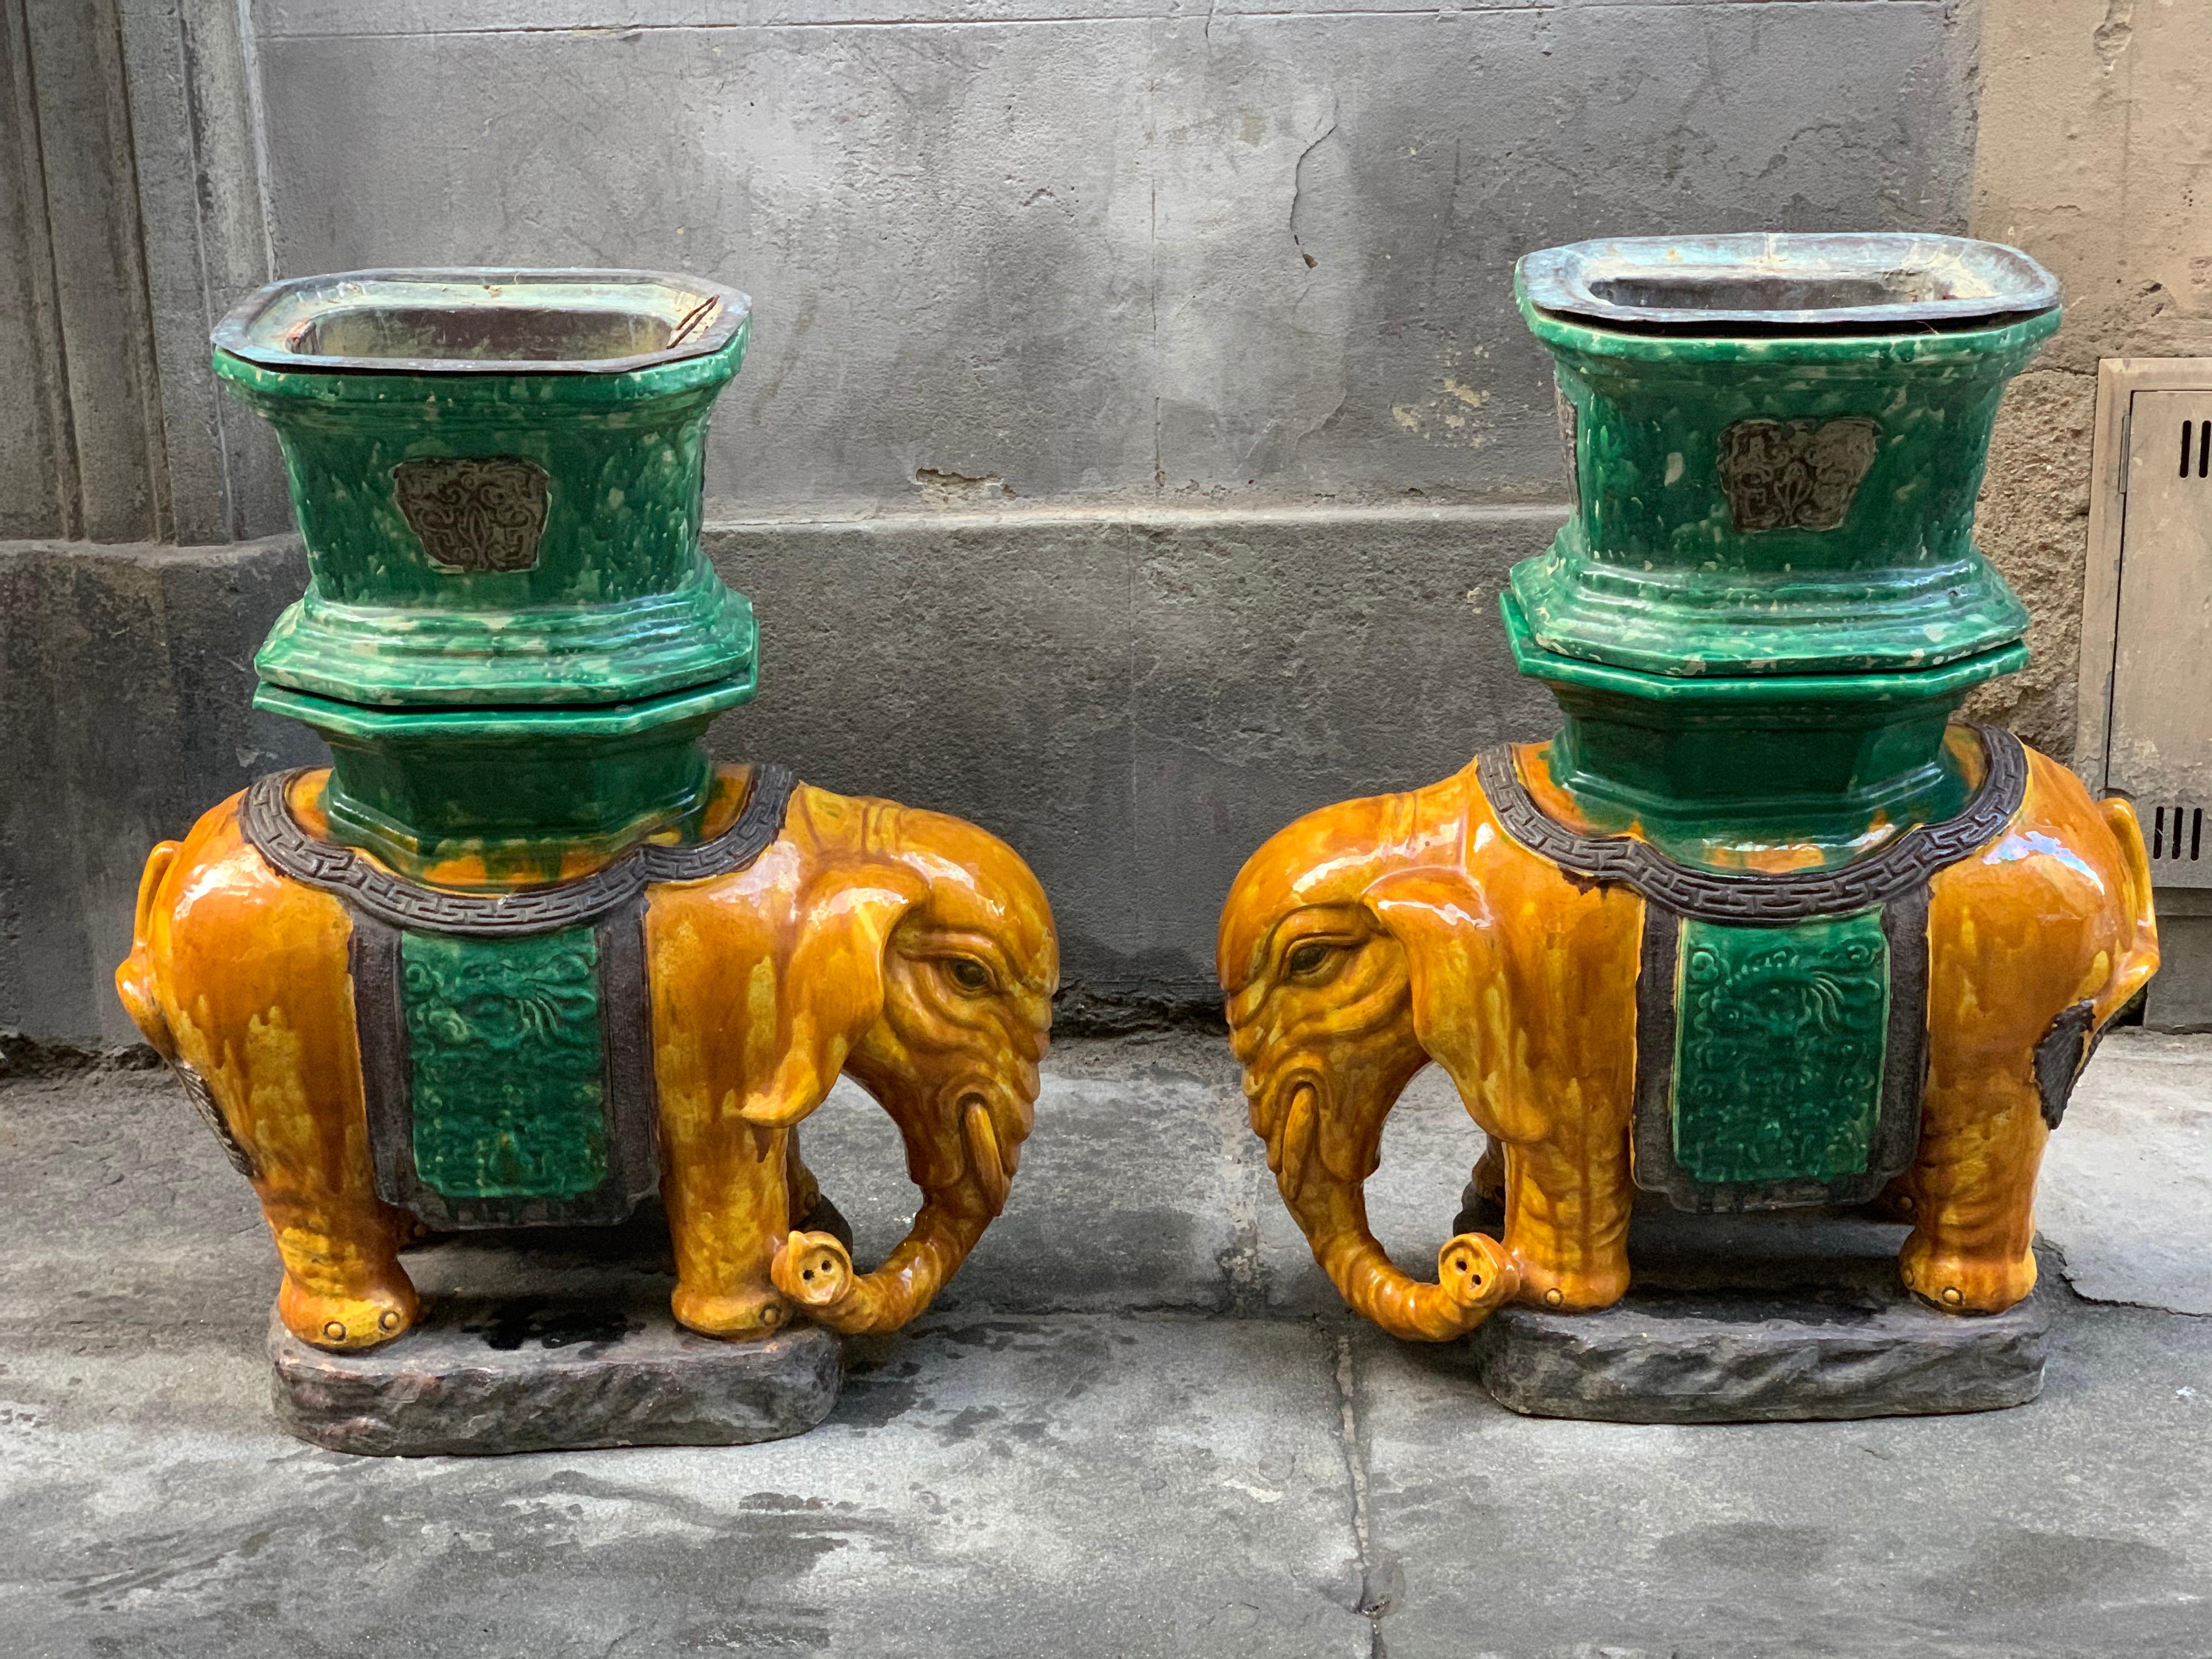 Pair of antique hand painted Vietnamese ceramic elephant stools/plant holder in a beautiful green and ochre yellow ceramic glaze. These charming elephants are made of two separate pieces, elephant statue and plant holder. They would work equally